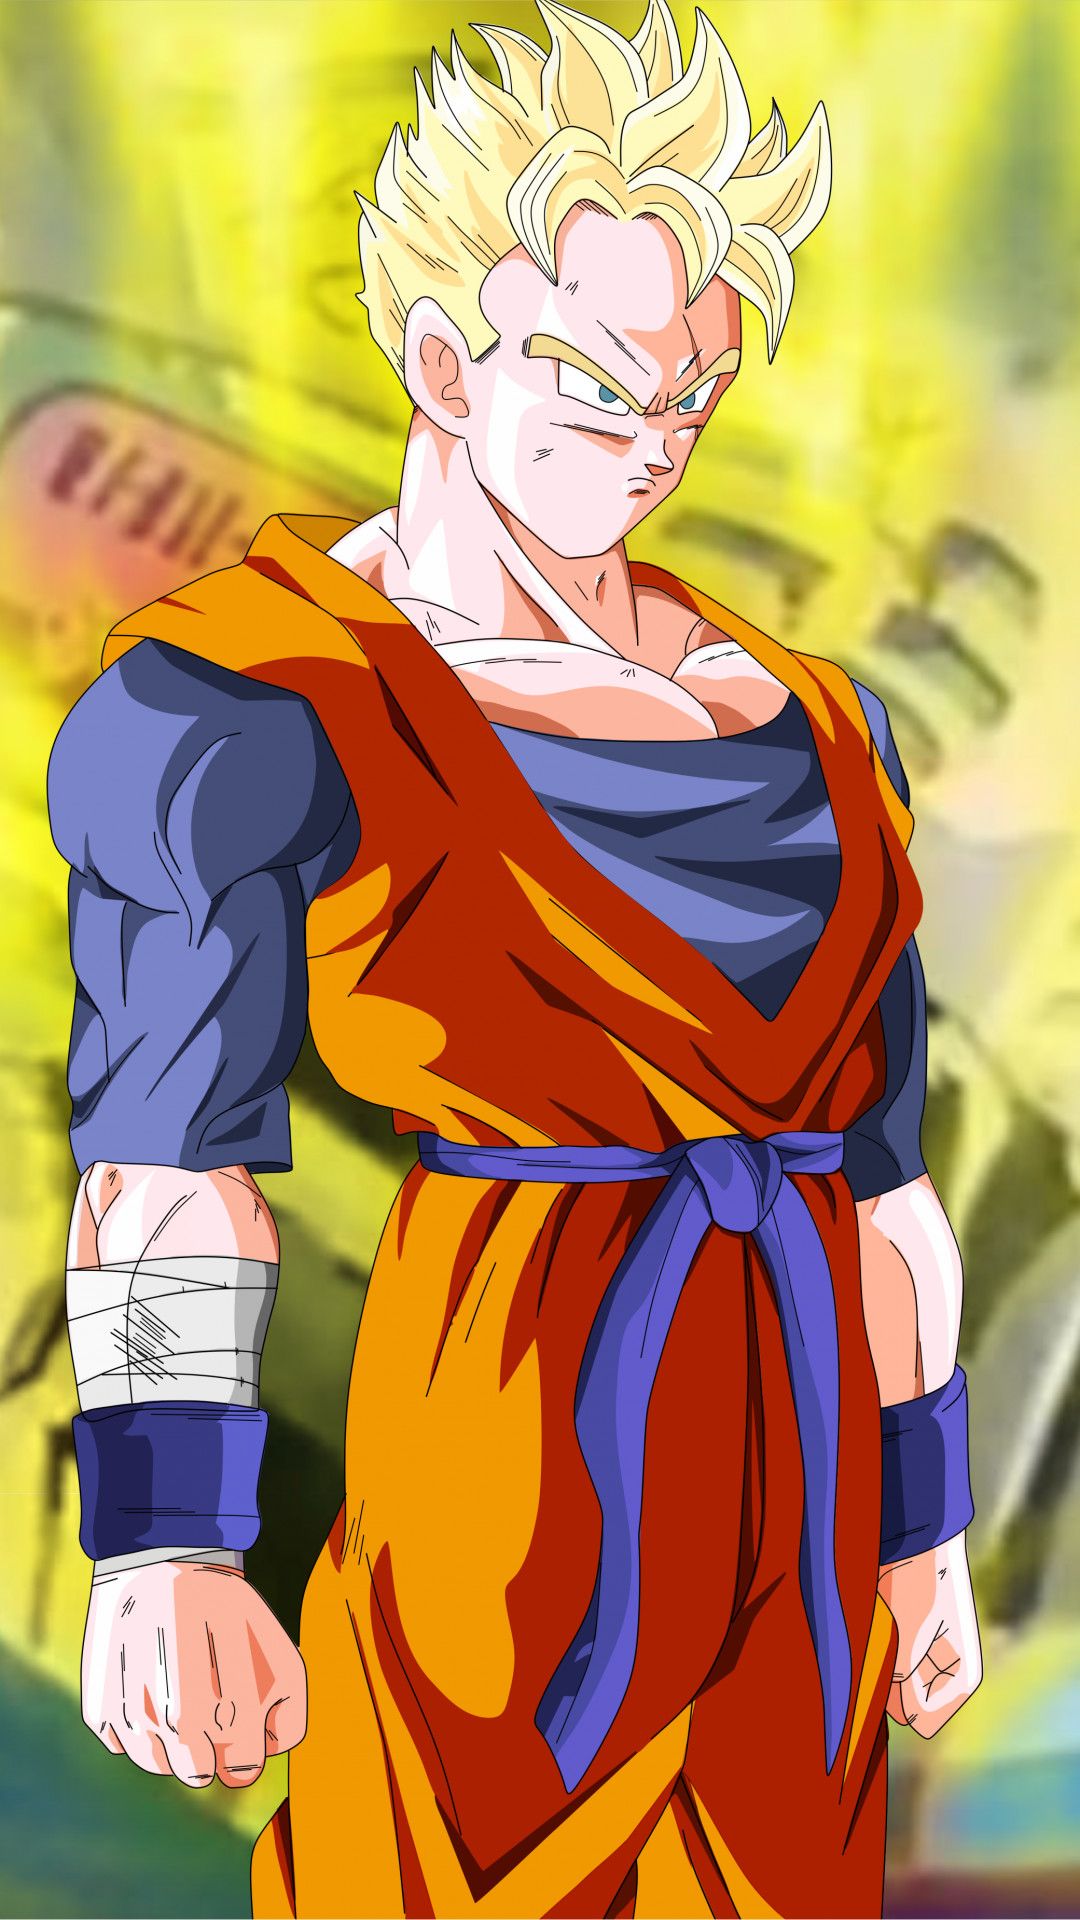 Future Gohan Image, HD Photo (1080p), Wallpaper (Android IPhone) (2021)